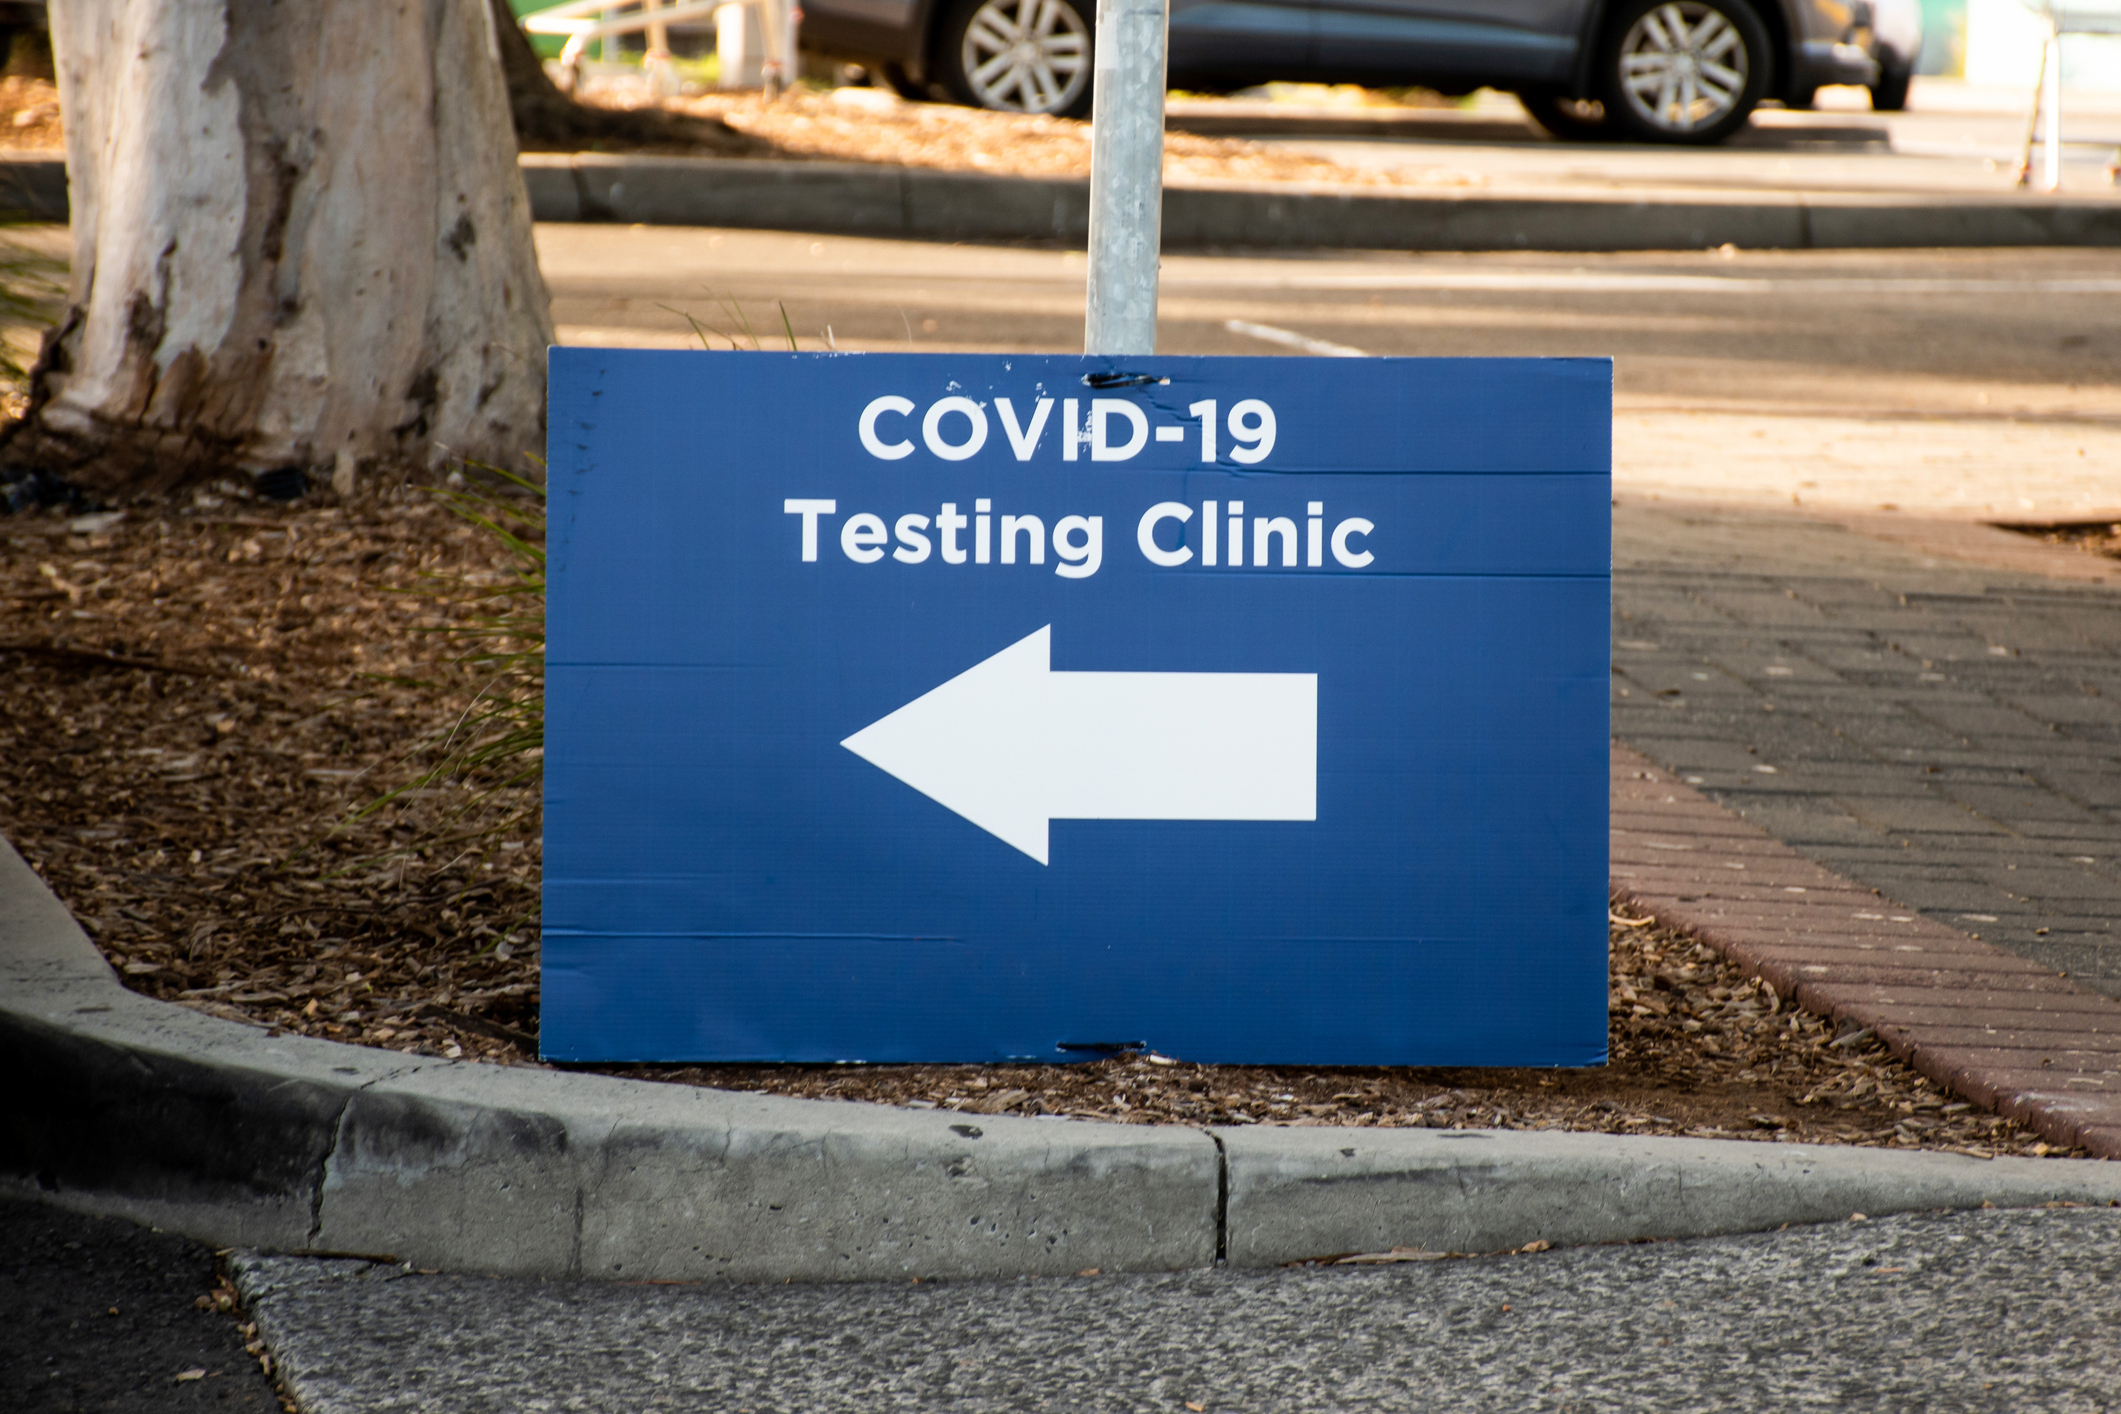 COVID-19 testing sites are desperately needed in eastern Suffolk, local lawmakers say